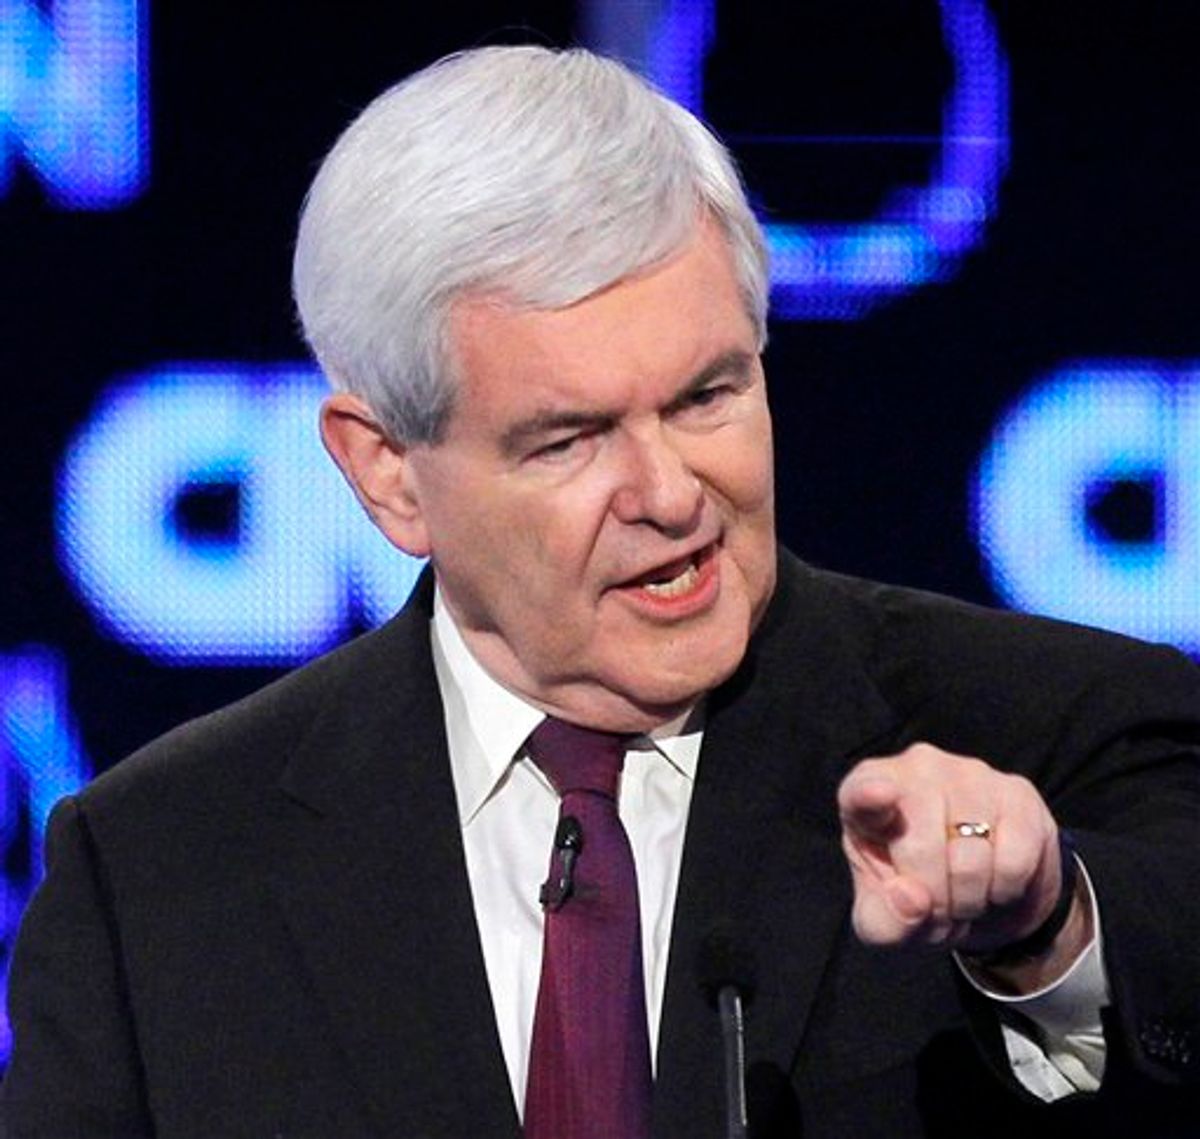 FILE - In this Oct. 18, 2011 file photo, Republican presidential candidate, former House Speaker Newt Gingrich, makes a point during a Republican presidential debate in Las Vegas. (AP Photo/Chris Carlson, File)     (AP)